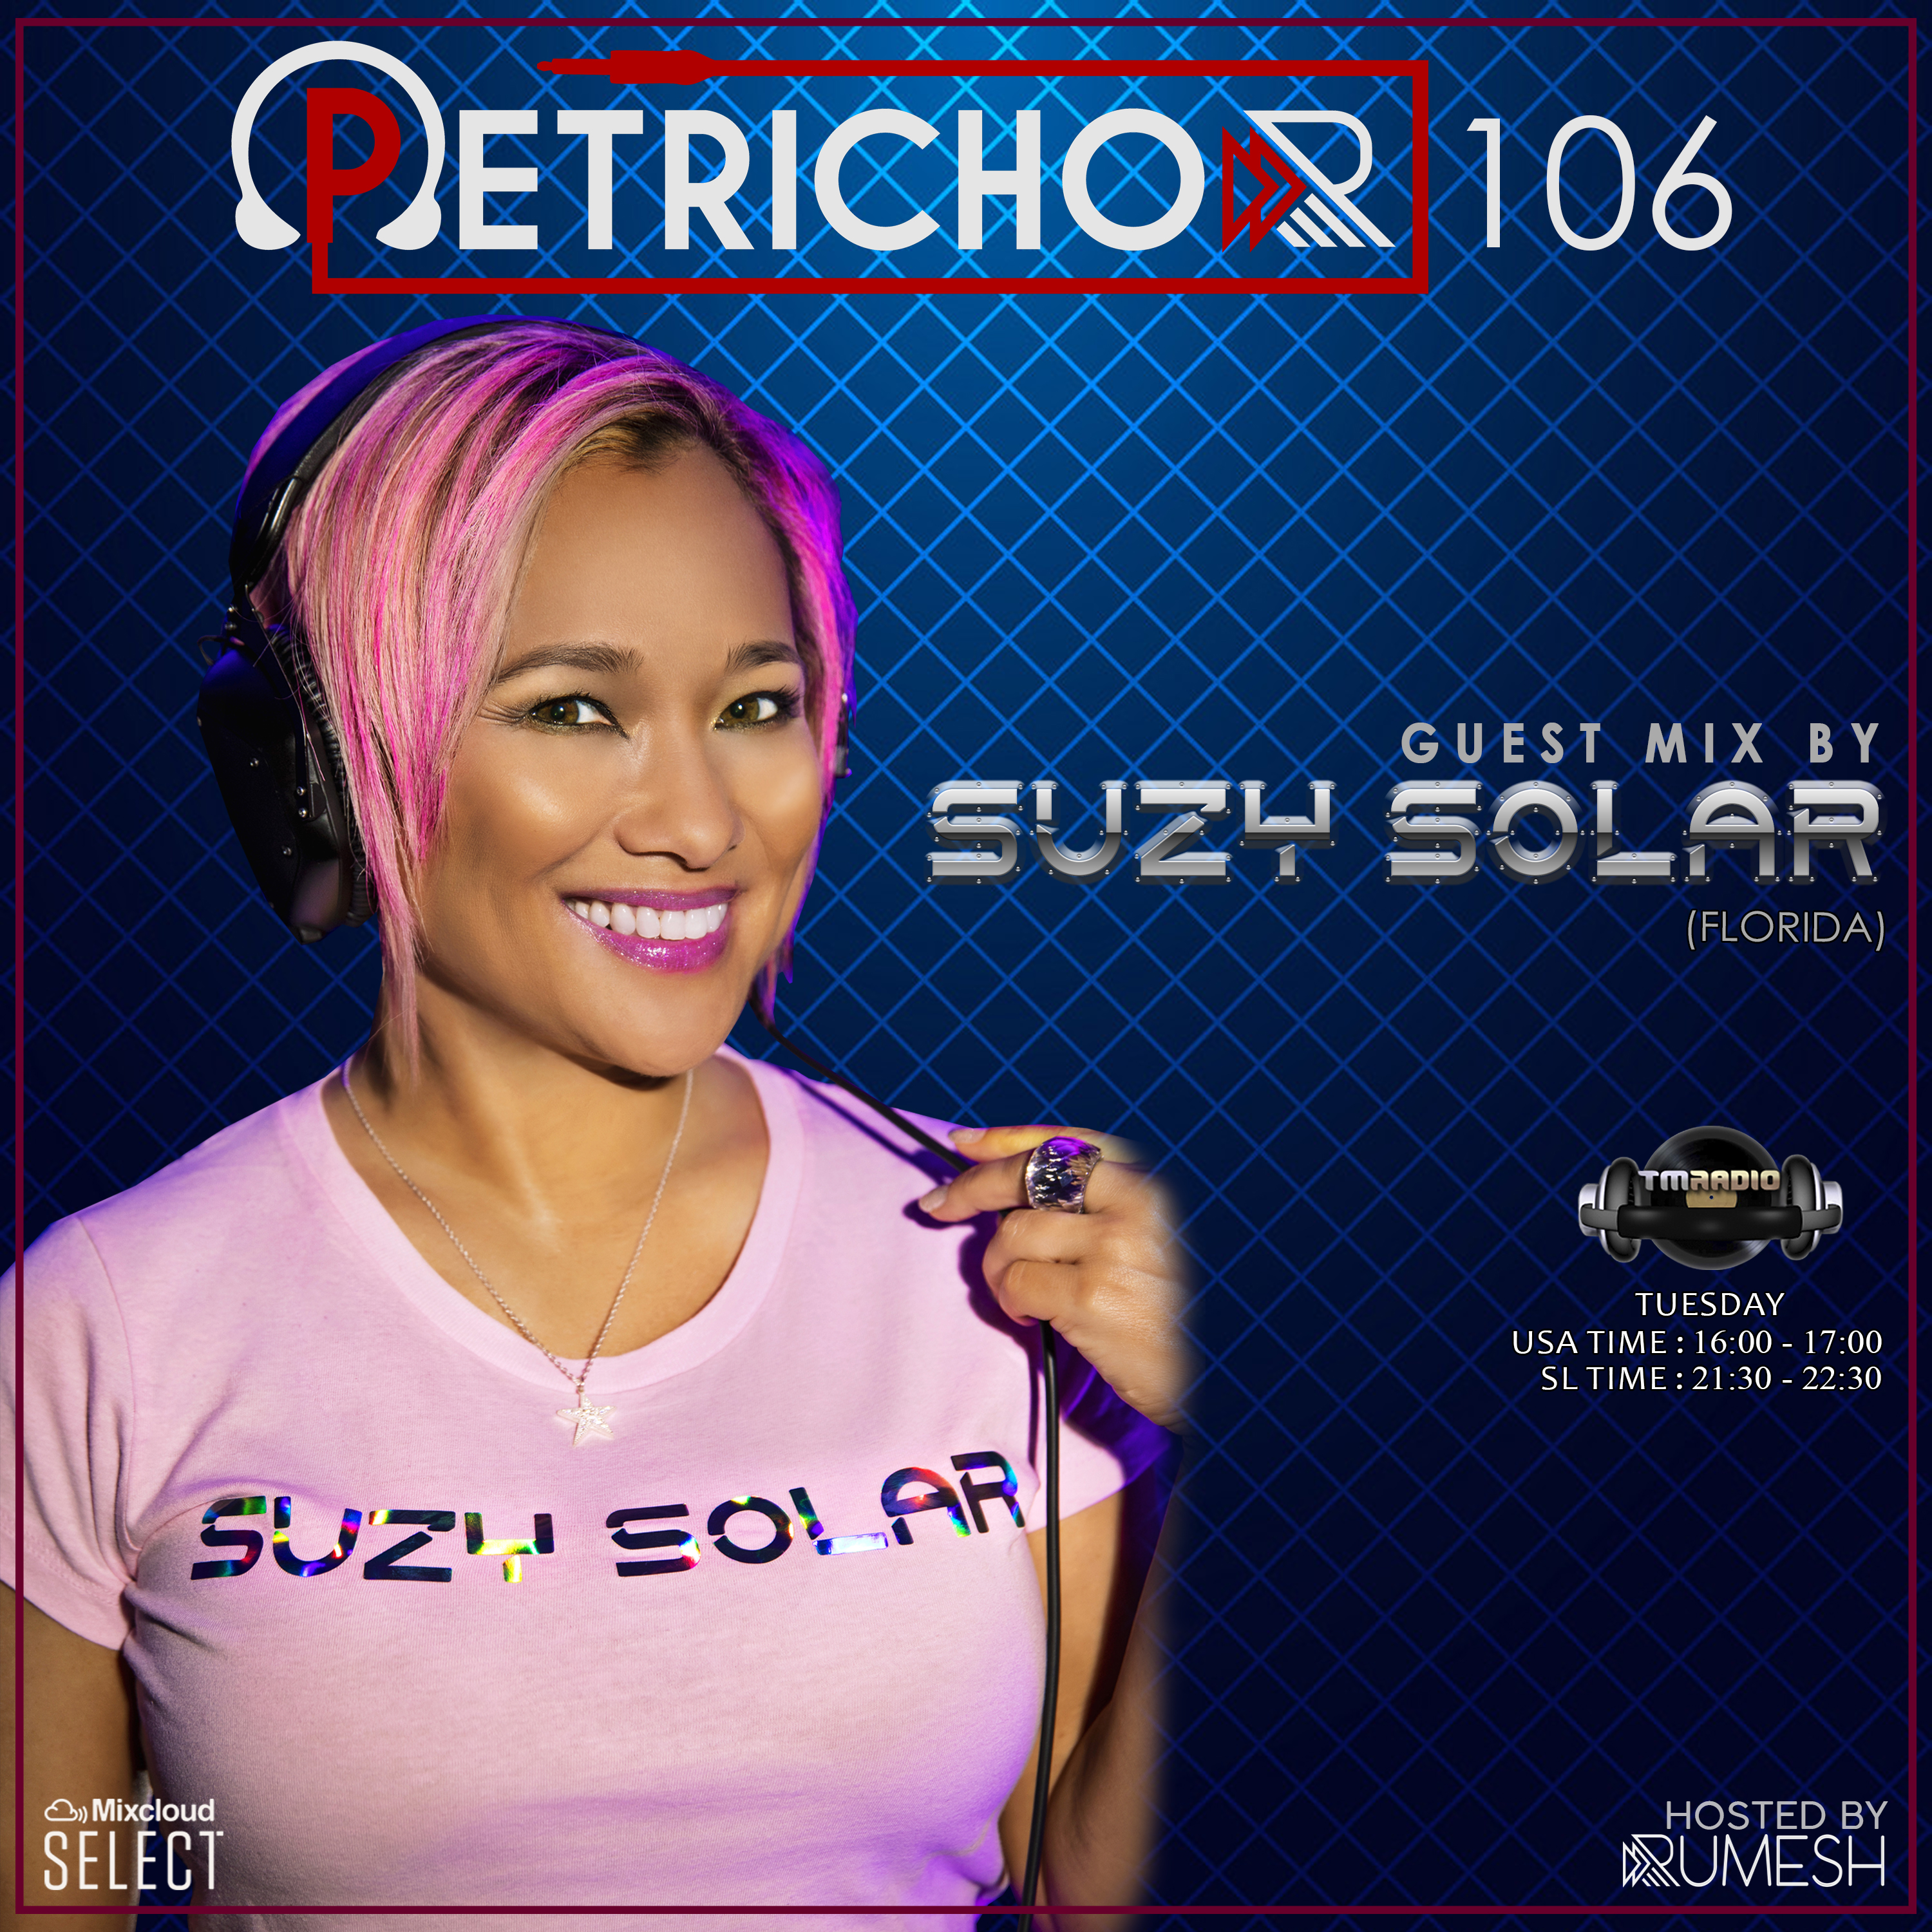 Petrichor 106 Guest Mix by Suzy Solar -(Florida) (from February 8th)